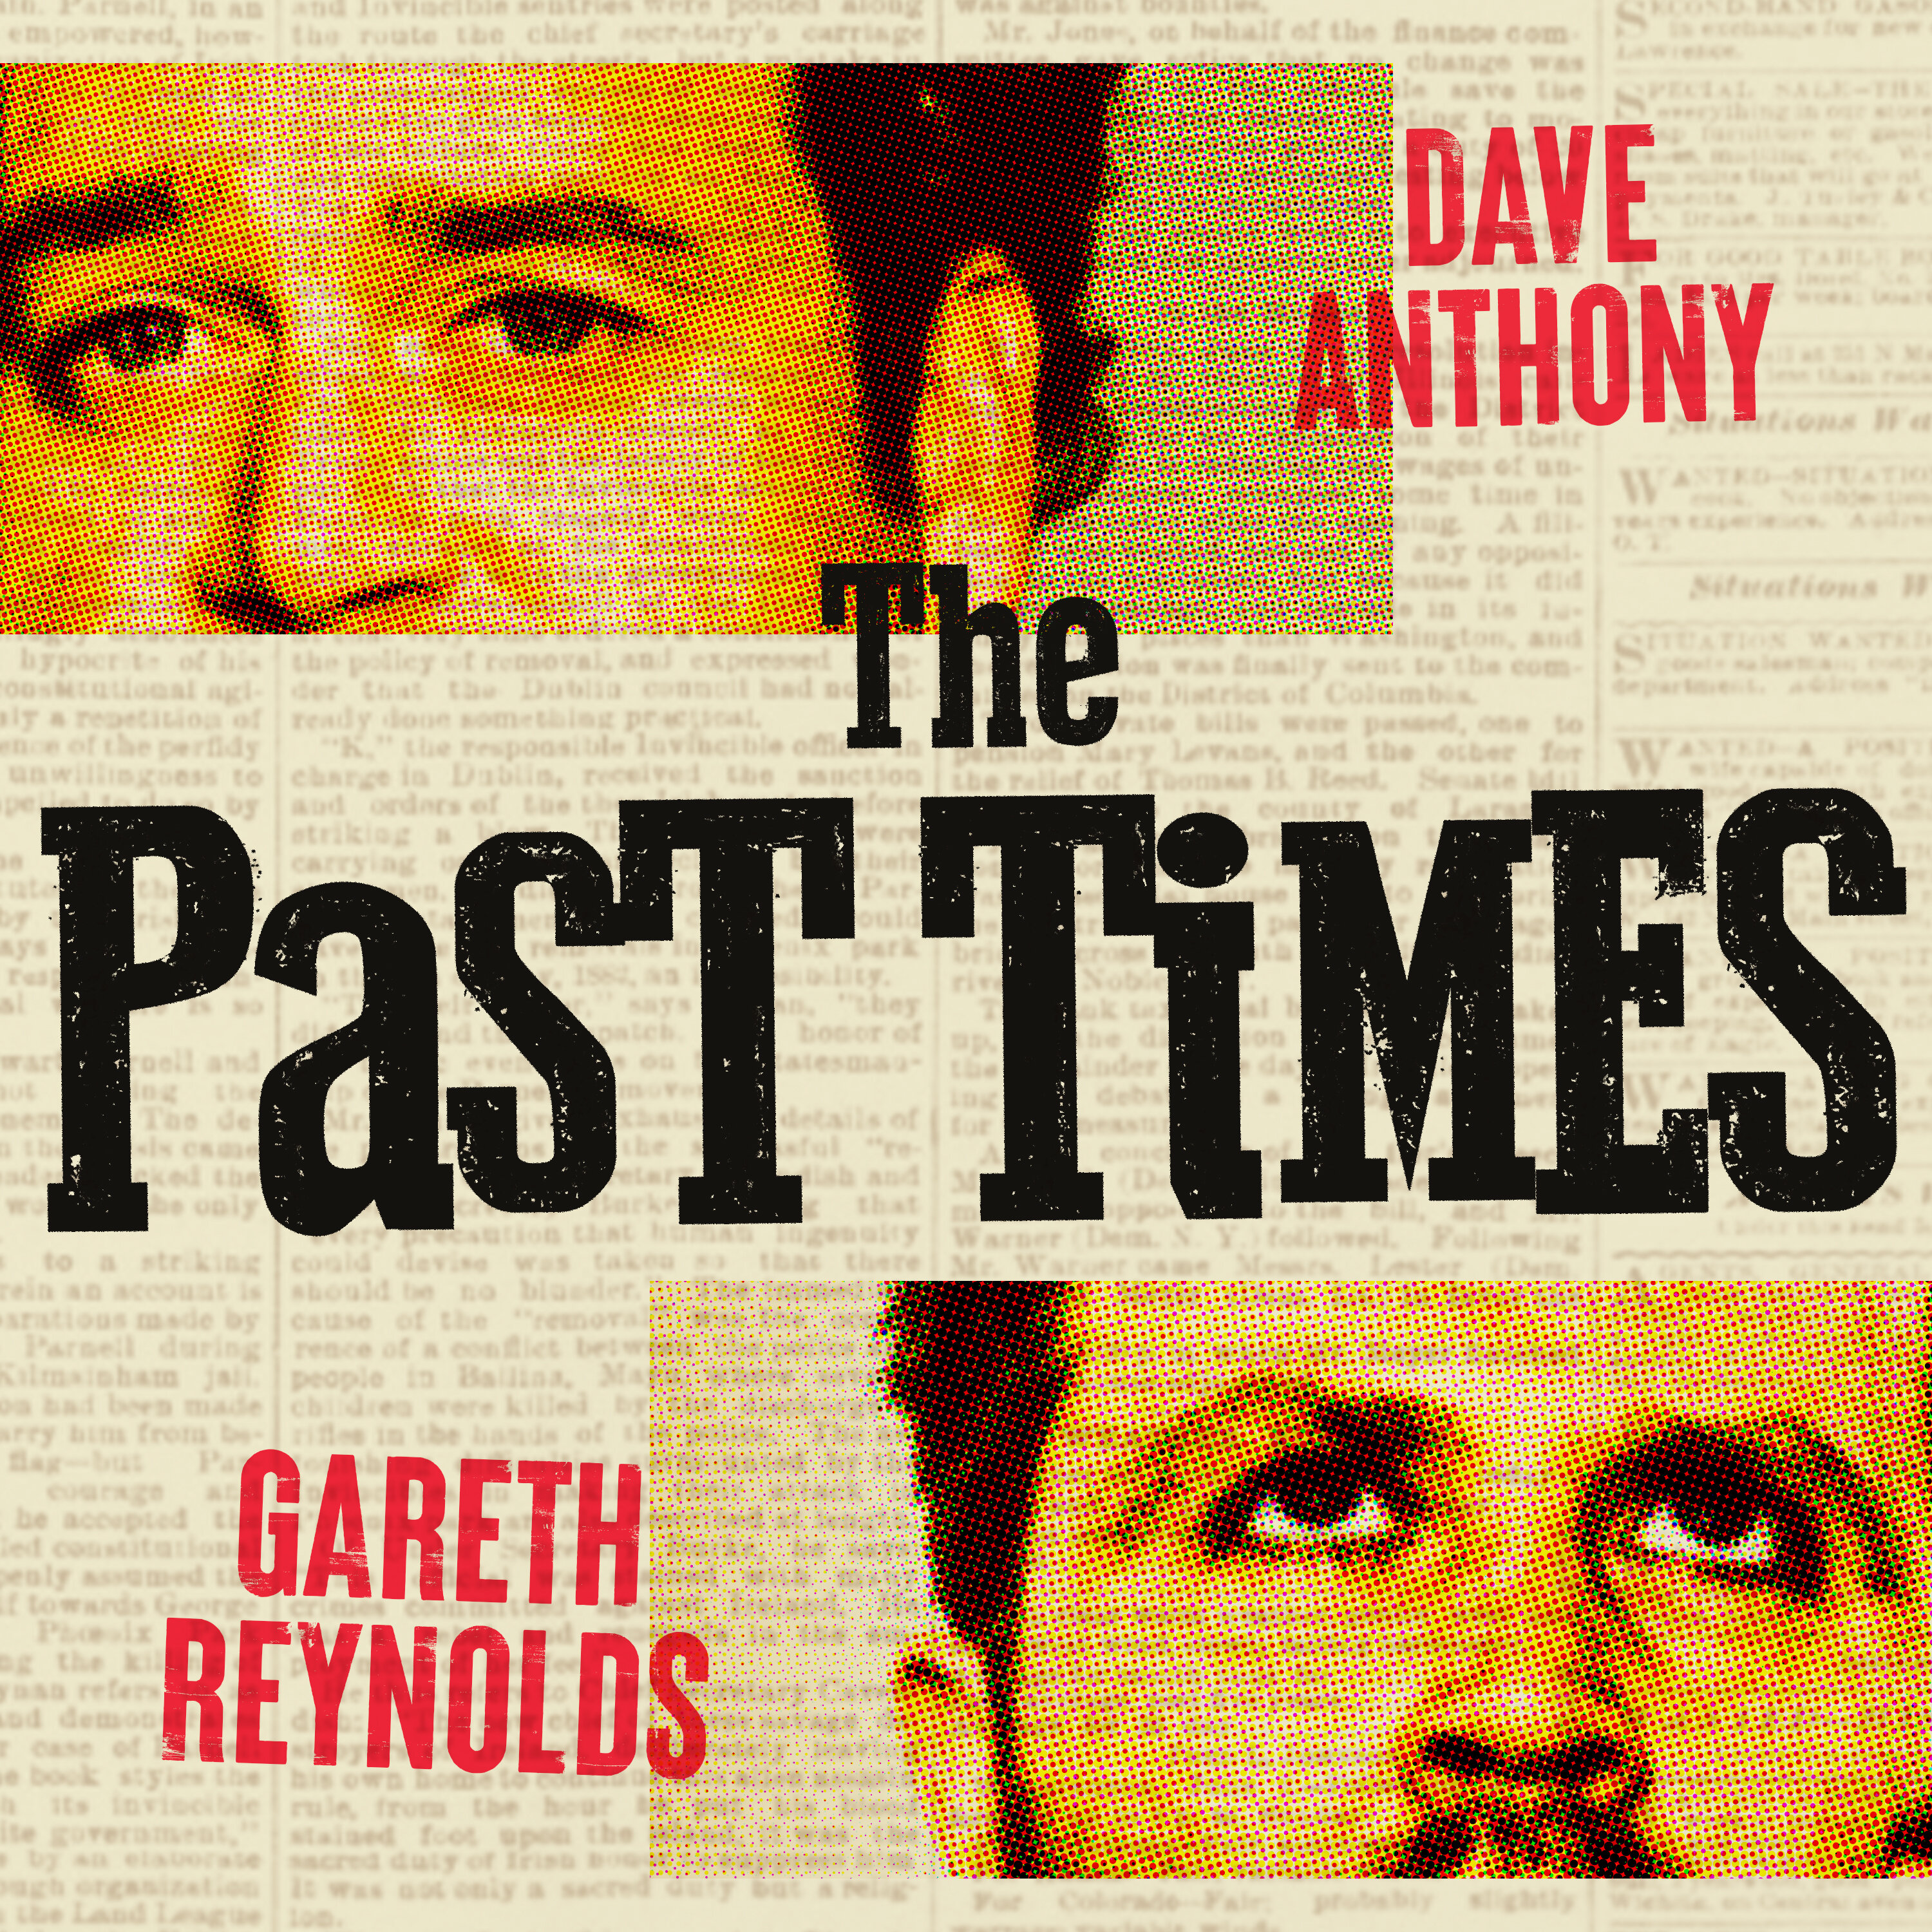 68 - The Past Times with April Richardson